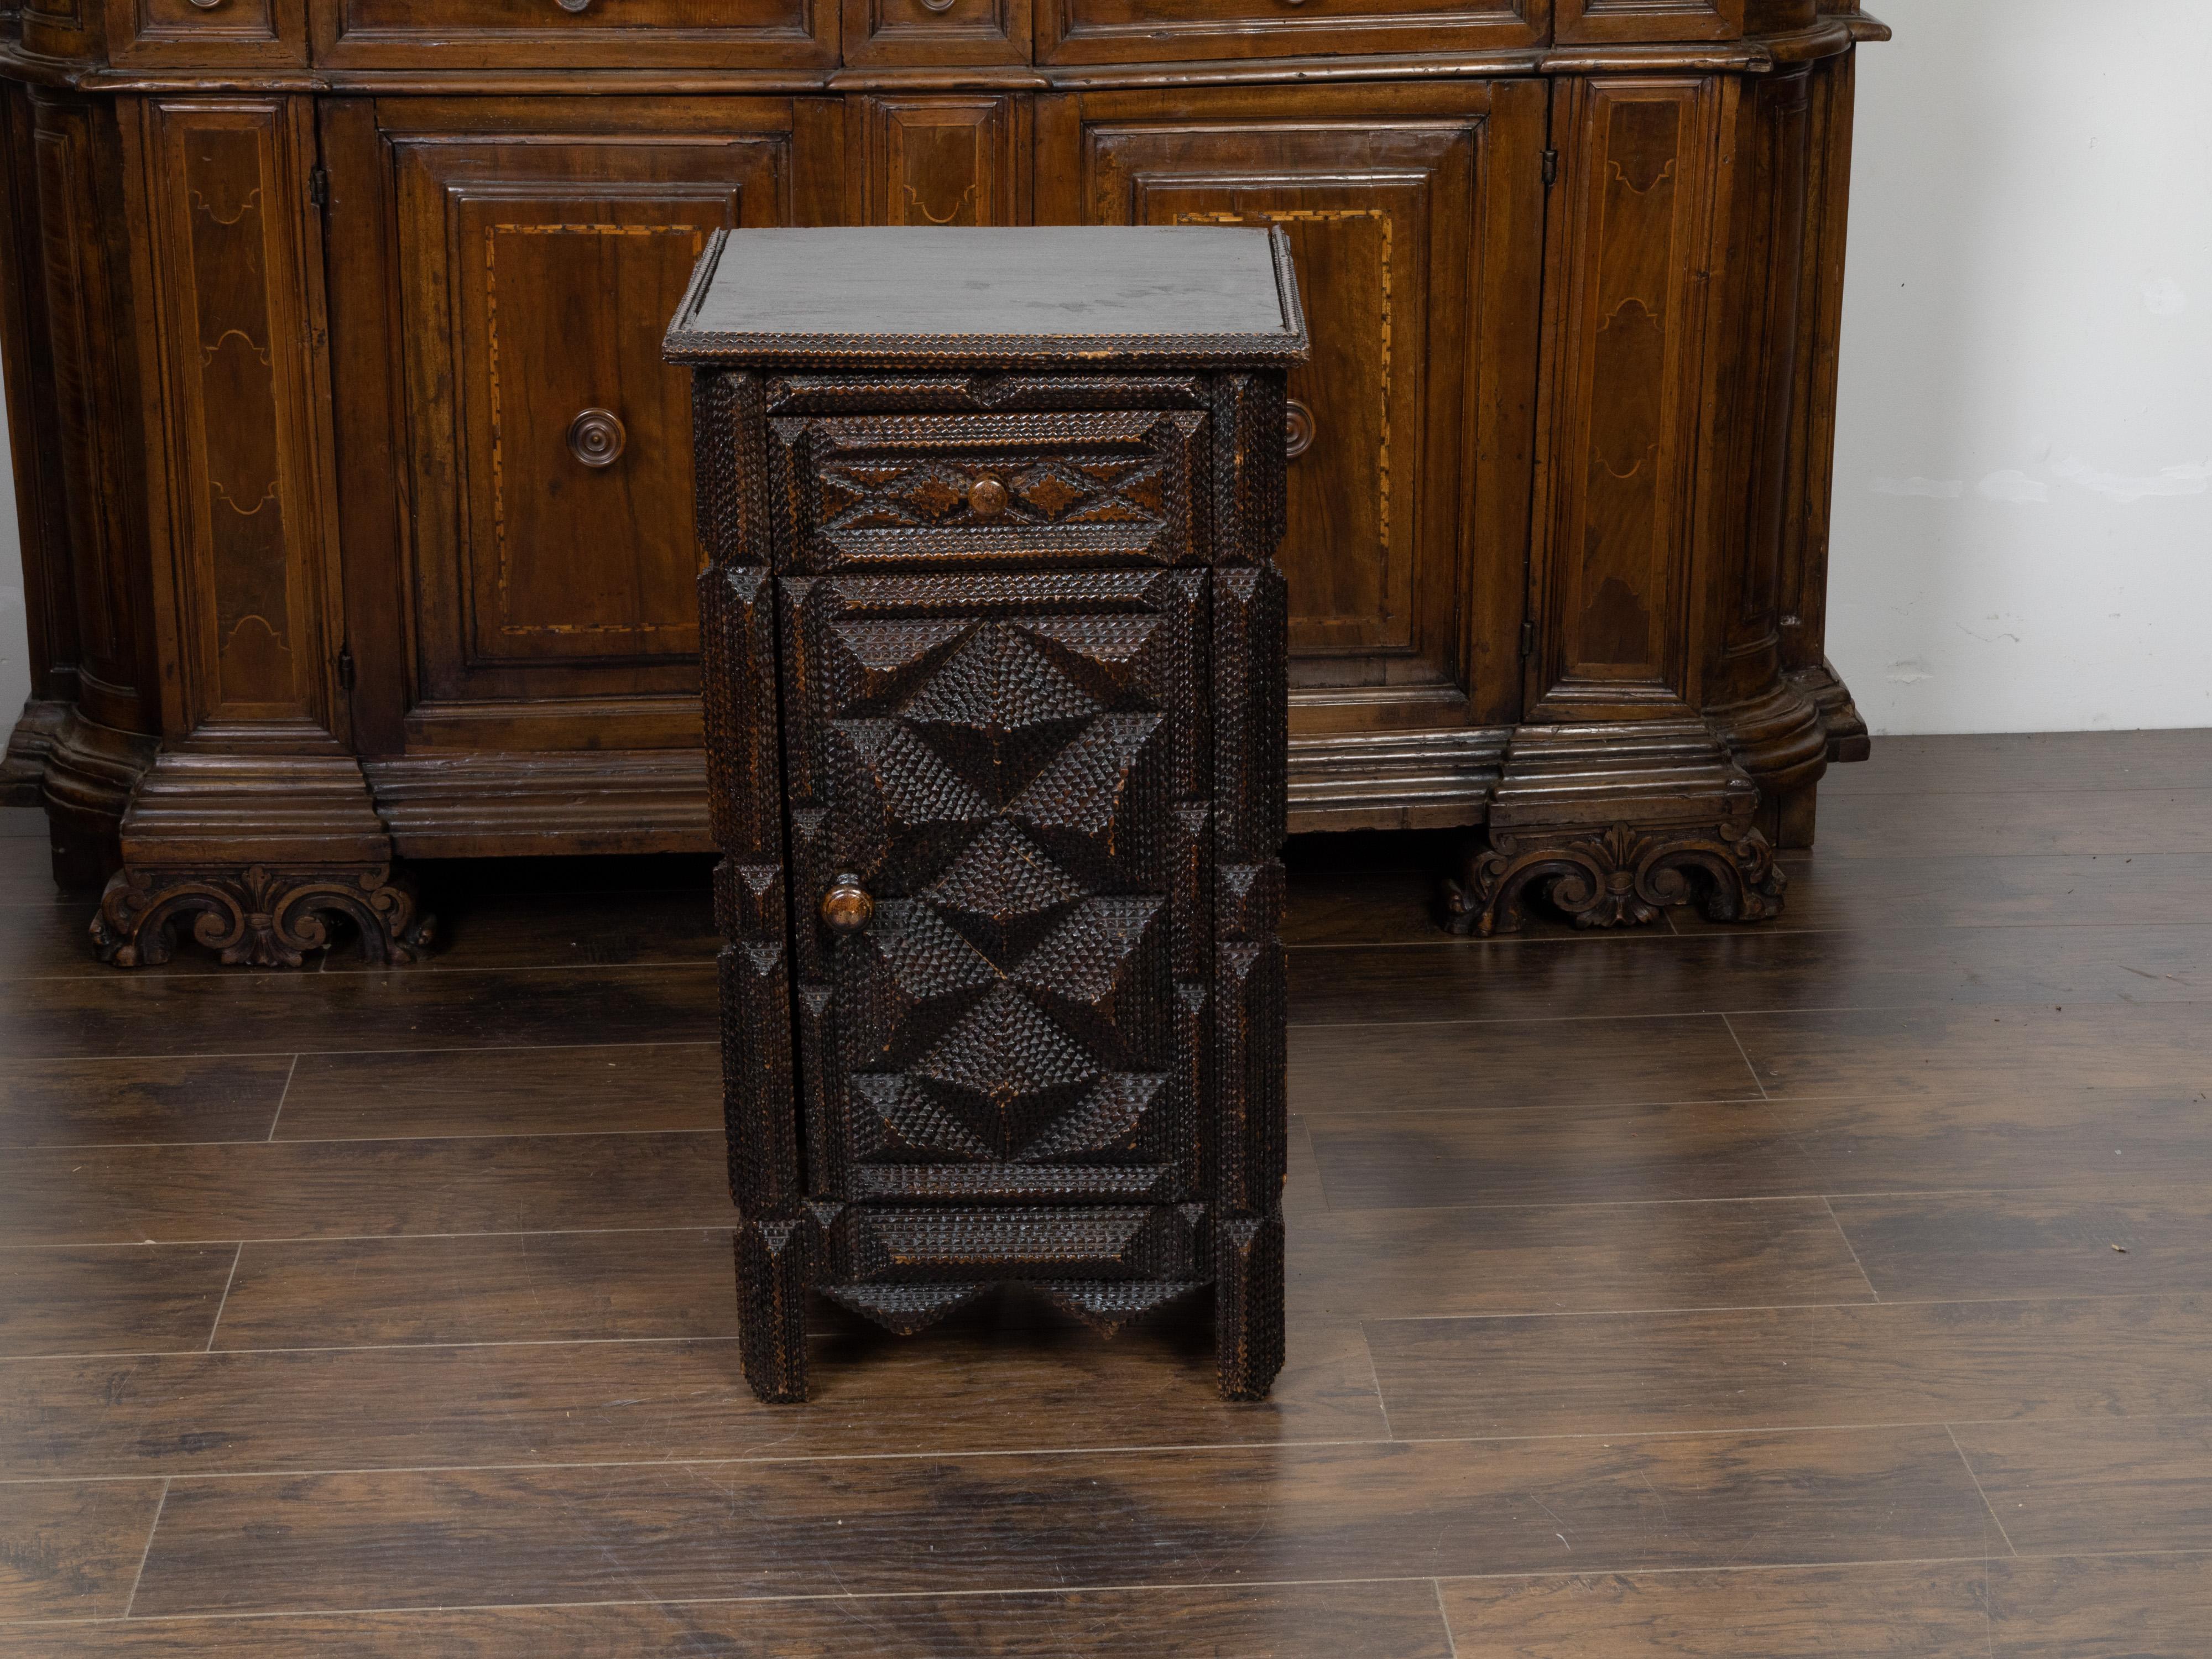 An unusual French Tramp Art small cabinet from the early 20th century, with raised geometric motifs. Created in France during the early years of the 20th century, this small cabinet features a rectangular top sitting above a drawer fitted with a